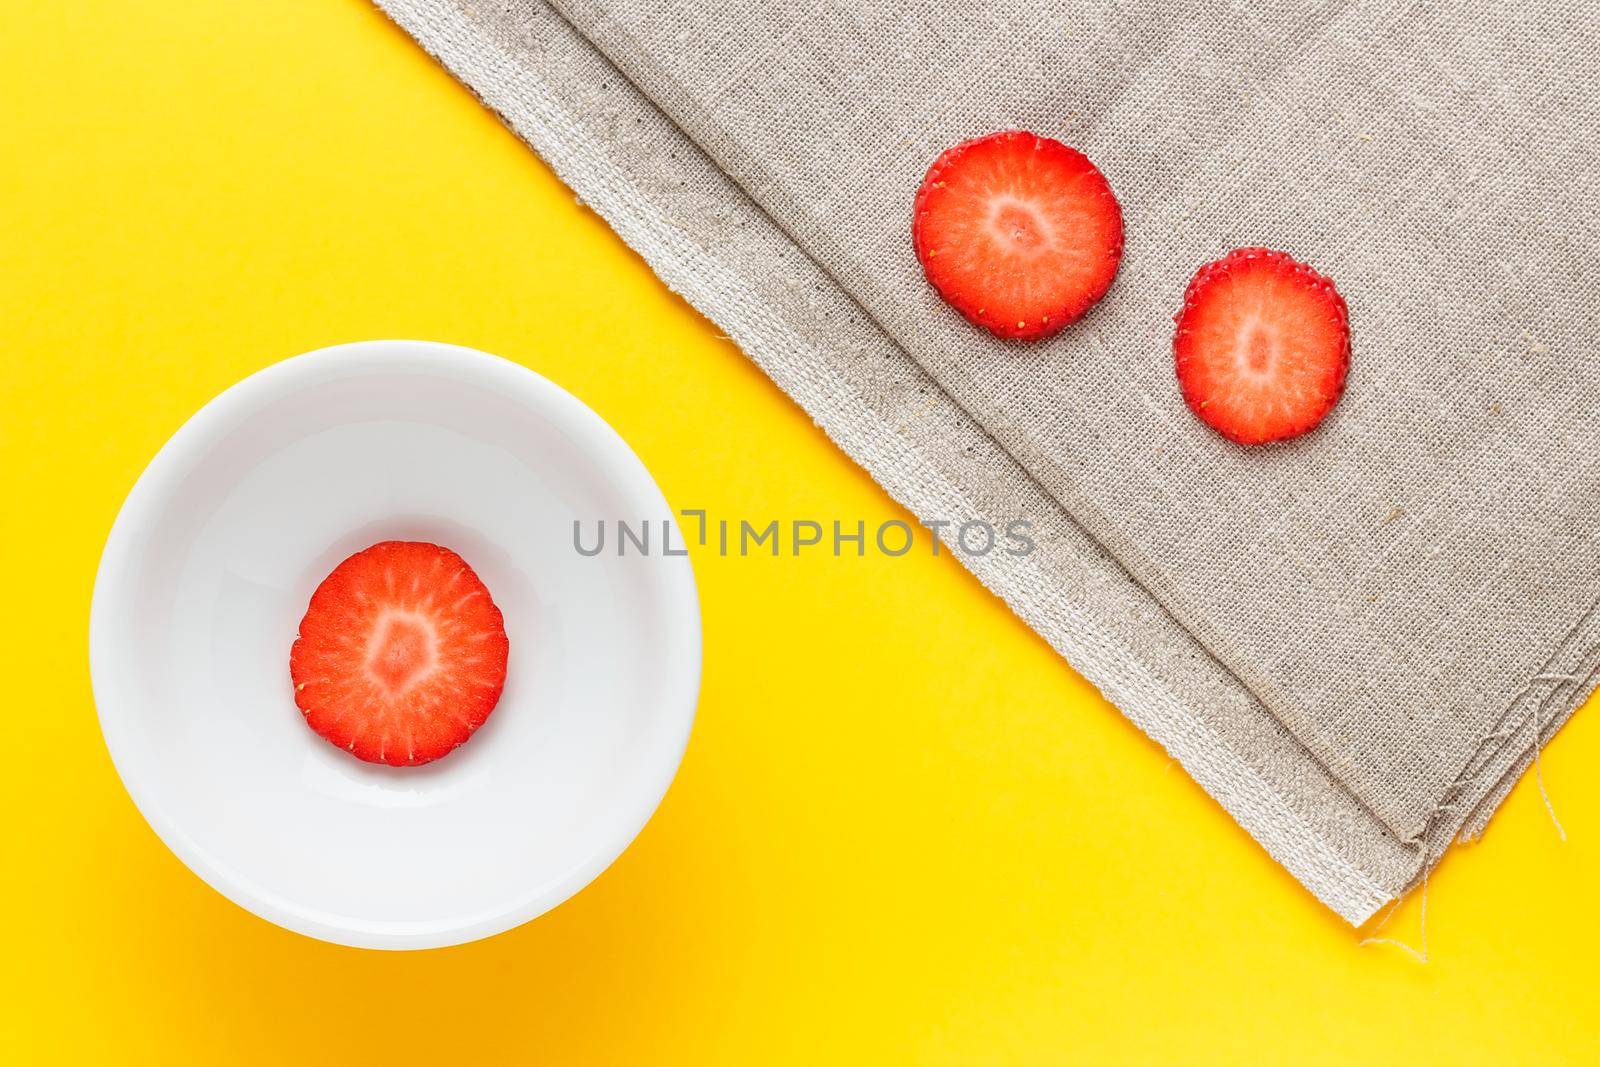 Three slices of fresh strawberries in a round white plate on yellow background and sackcloth. Horizontal image viewed from above.